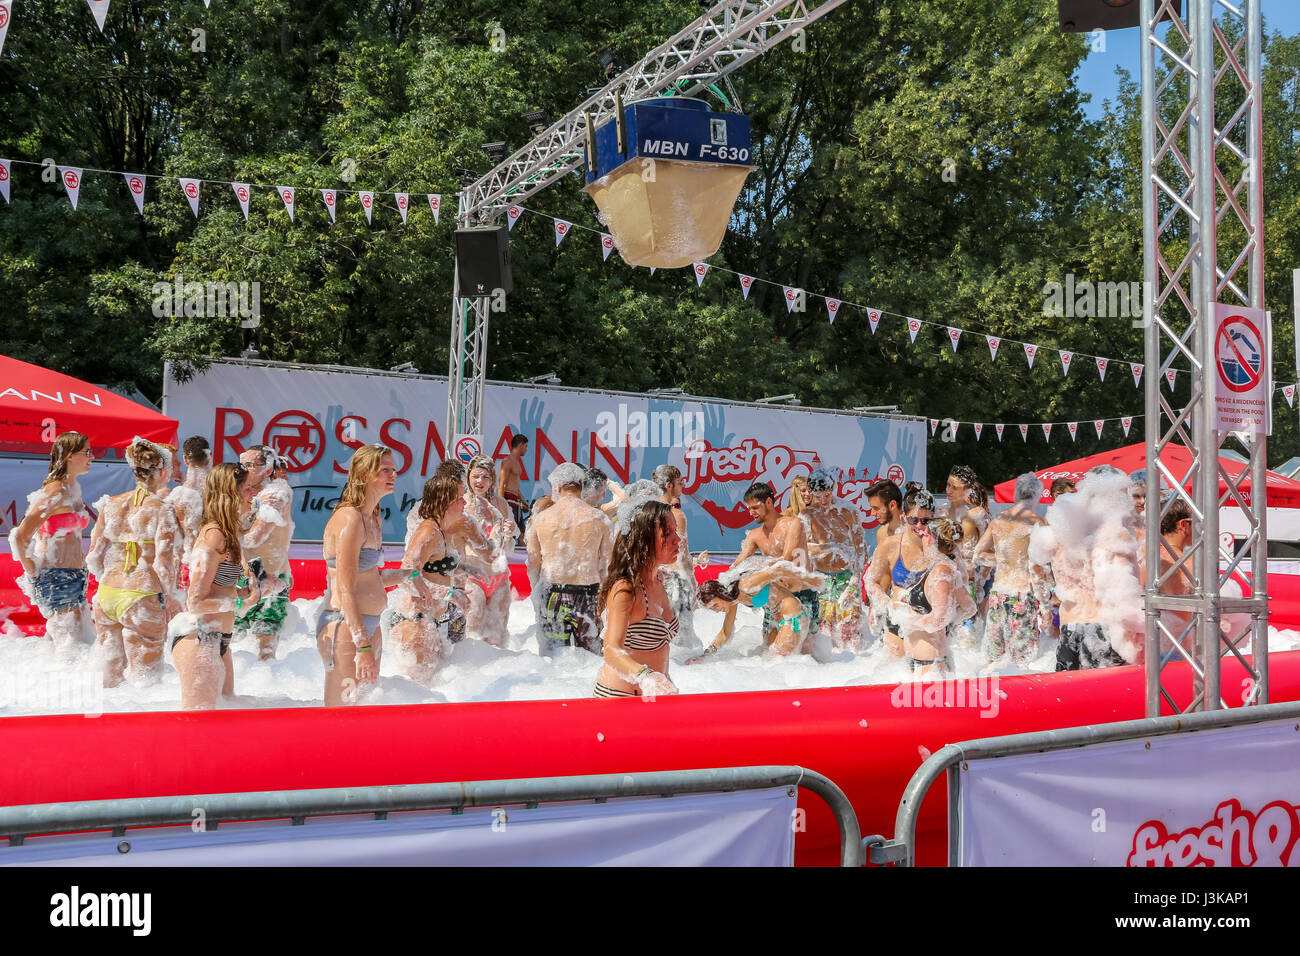 People enjoying a bubble bath at the Sziget Festival in Budapest, Hungary Stock Photo